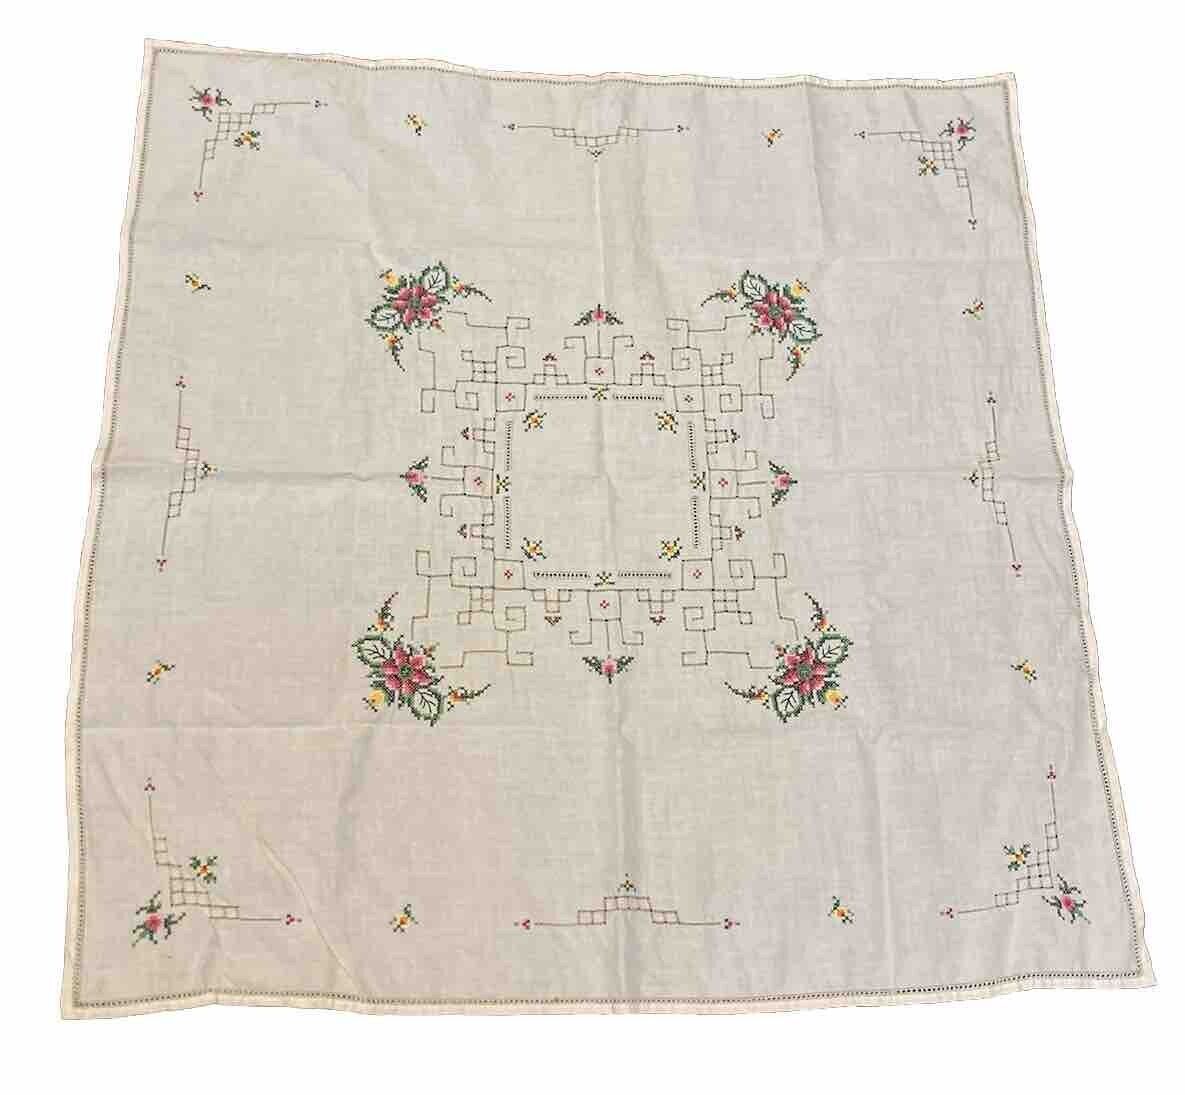 Vintage Tablecloth Square  Cross Stitched Spring Flowers Pierced Boarded 30”x30”